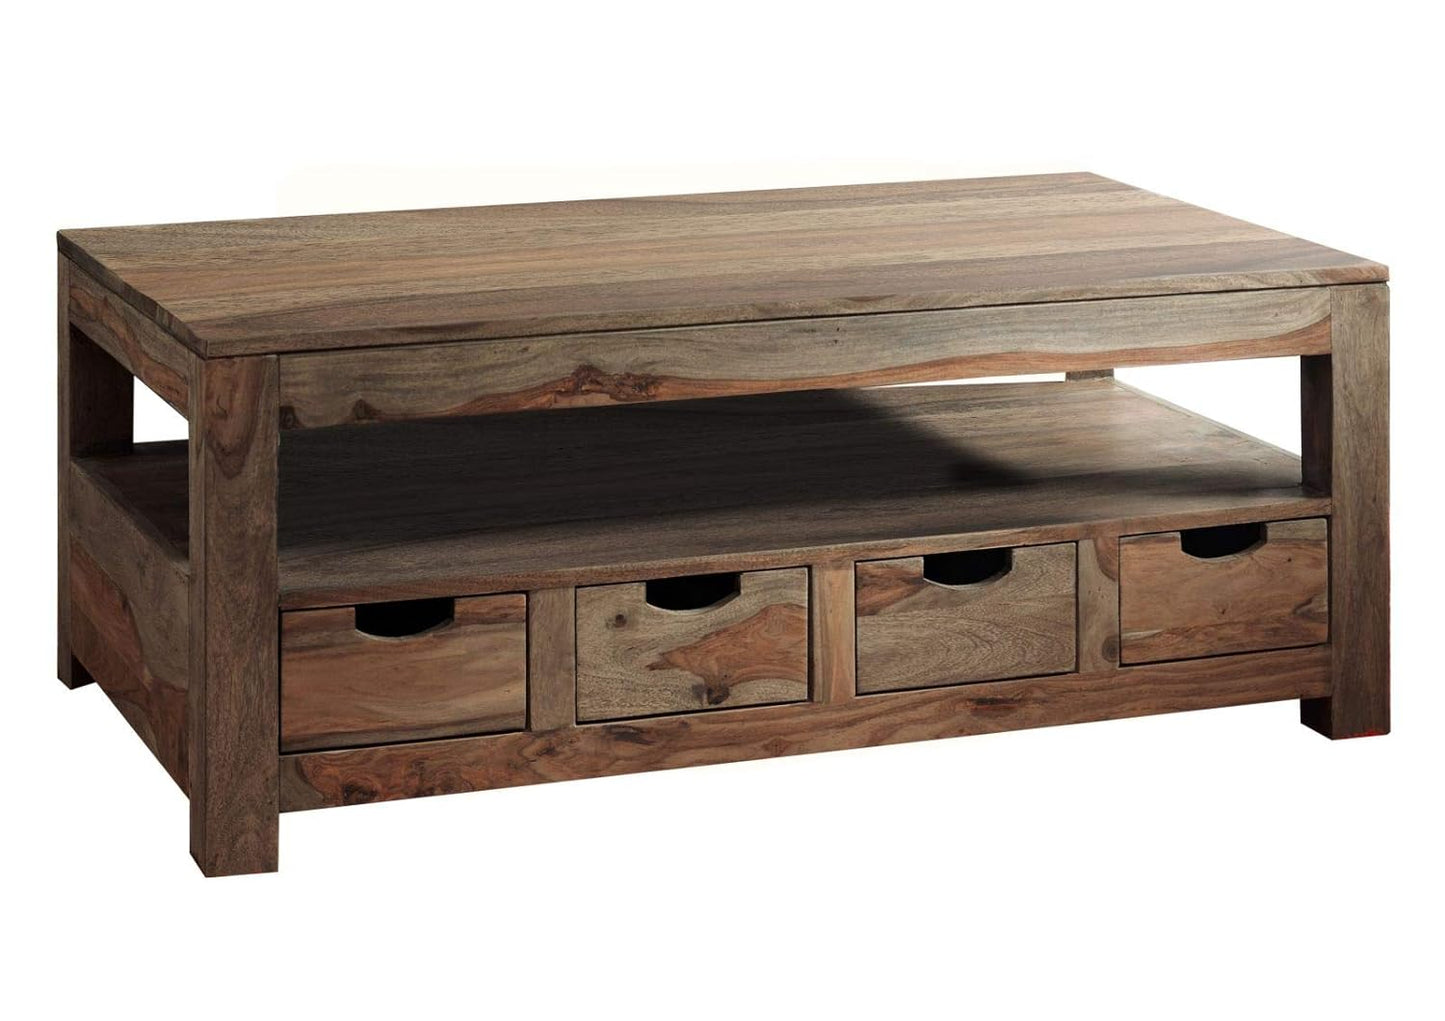 Coffee table with four drawers made of solid sheesham wood